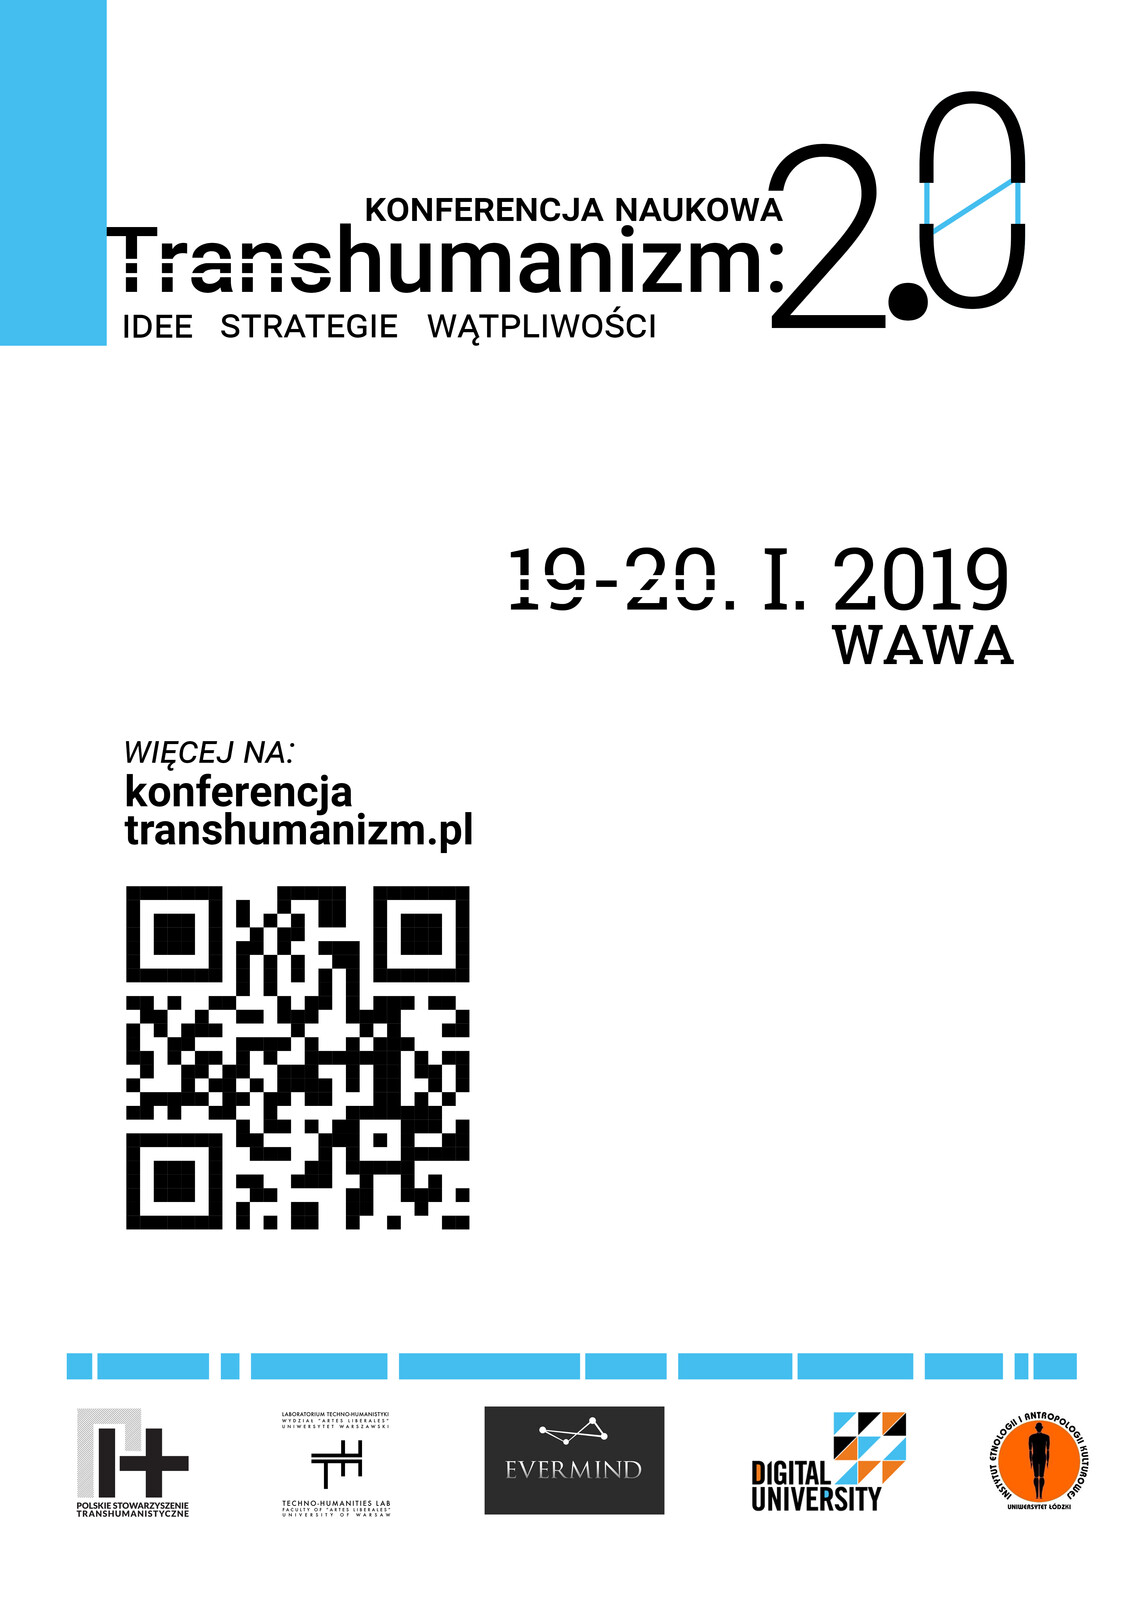 Poster for the 2.0 conference about Transhumanism  